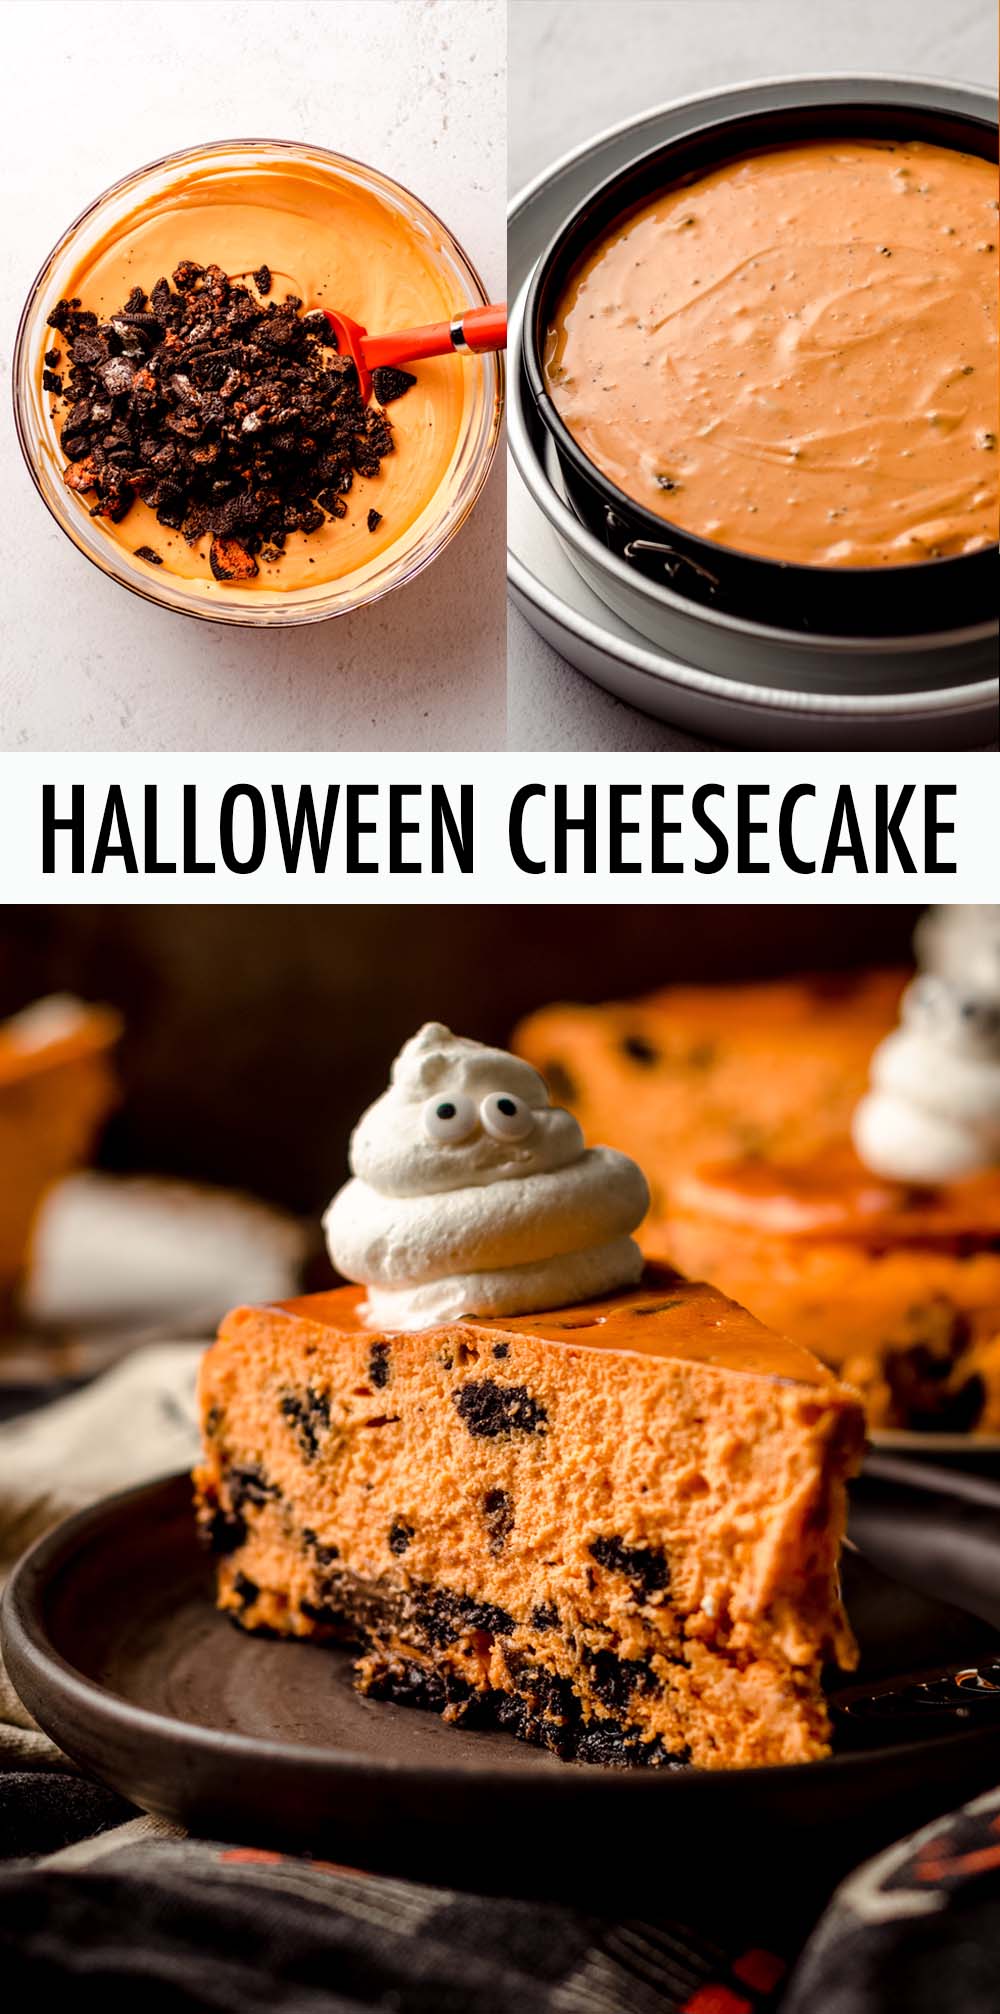 A basic cookies and cream cheesecake tinted orange and filled with chunks of Halloween Oreos, sitting atop a Halloween Oreo crust. Top with adorable whipped cream ghosts for a spooky treat, or use classic Oreos and leave out the orange coloring for a luscious cheesecake variation all year round! via @frshaprilflours